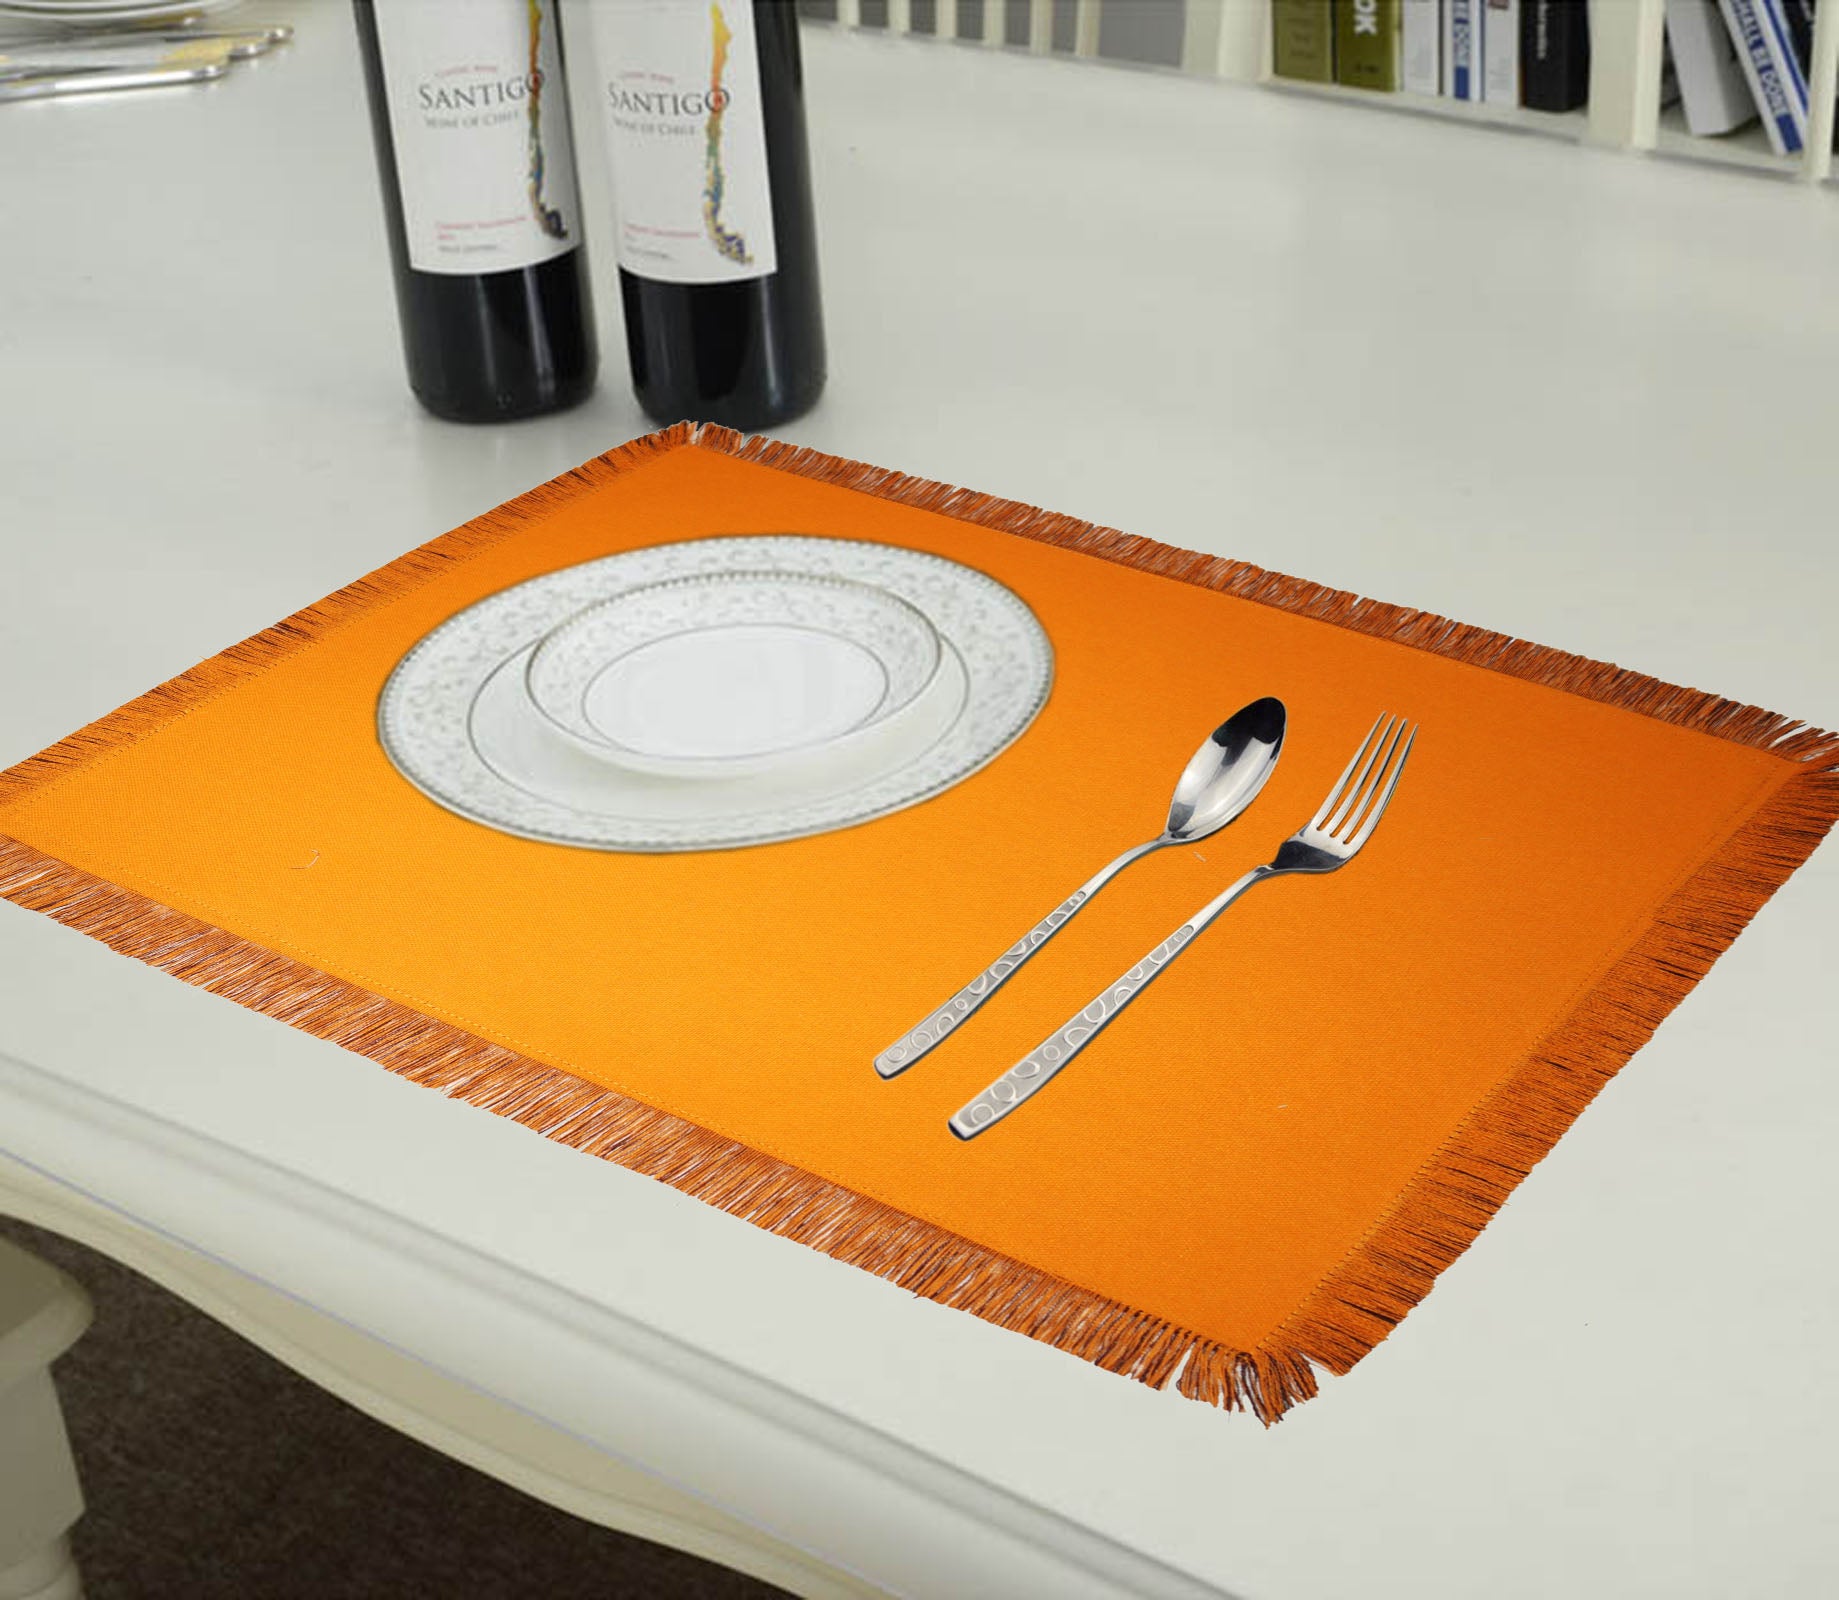 Lushomes dining table mats 6 pieces, Reversible Fancy Fringe dining table mat, dining table accessories for home, kitchen accessories items, Orange and Brown (13 x 19 Inches, Pack of 6)